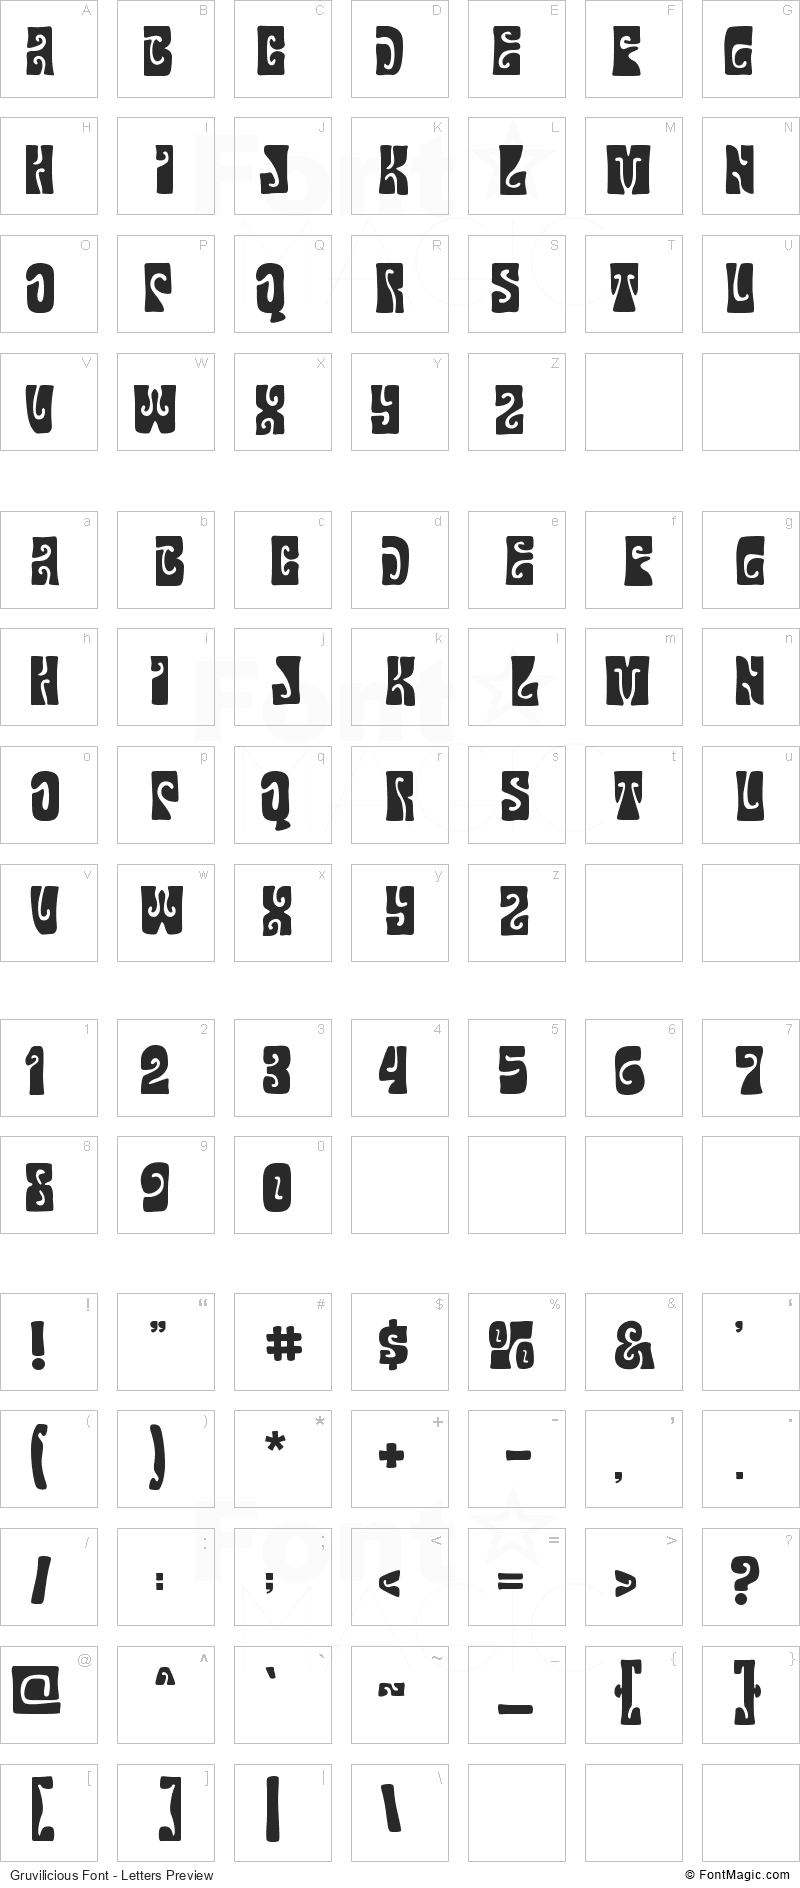 Gruvilicious Font - All Latters Preview Chart